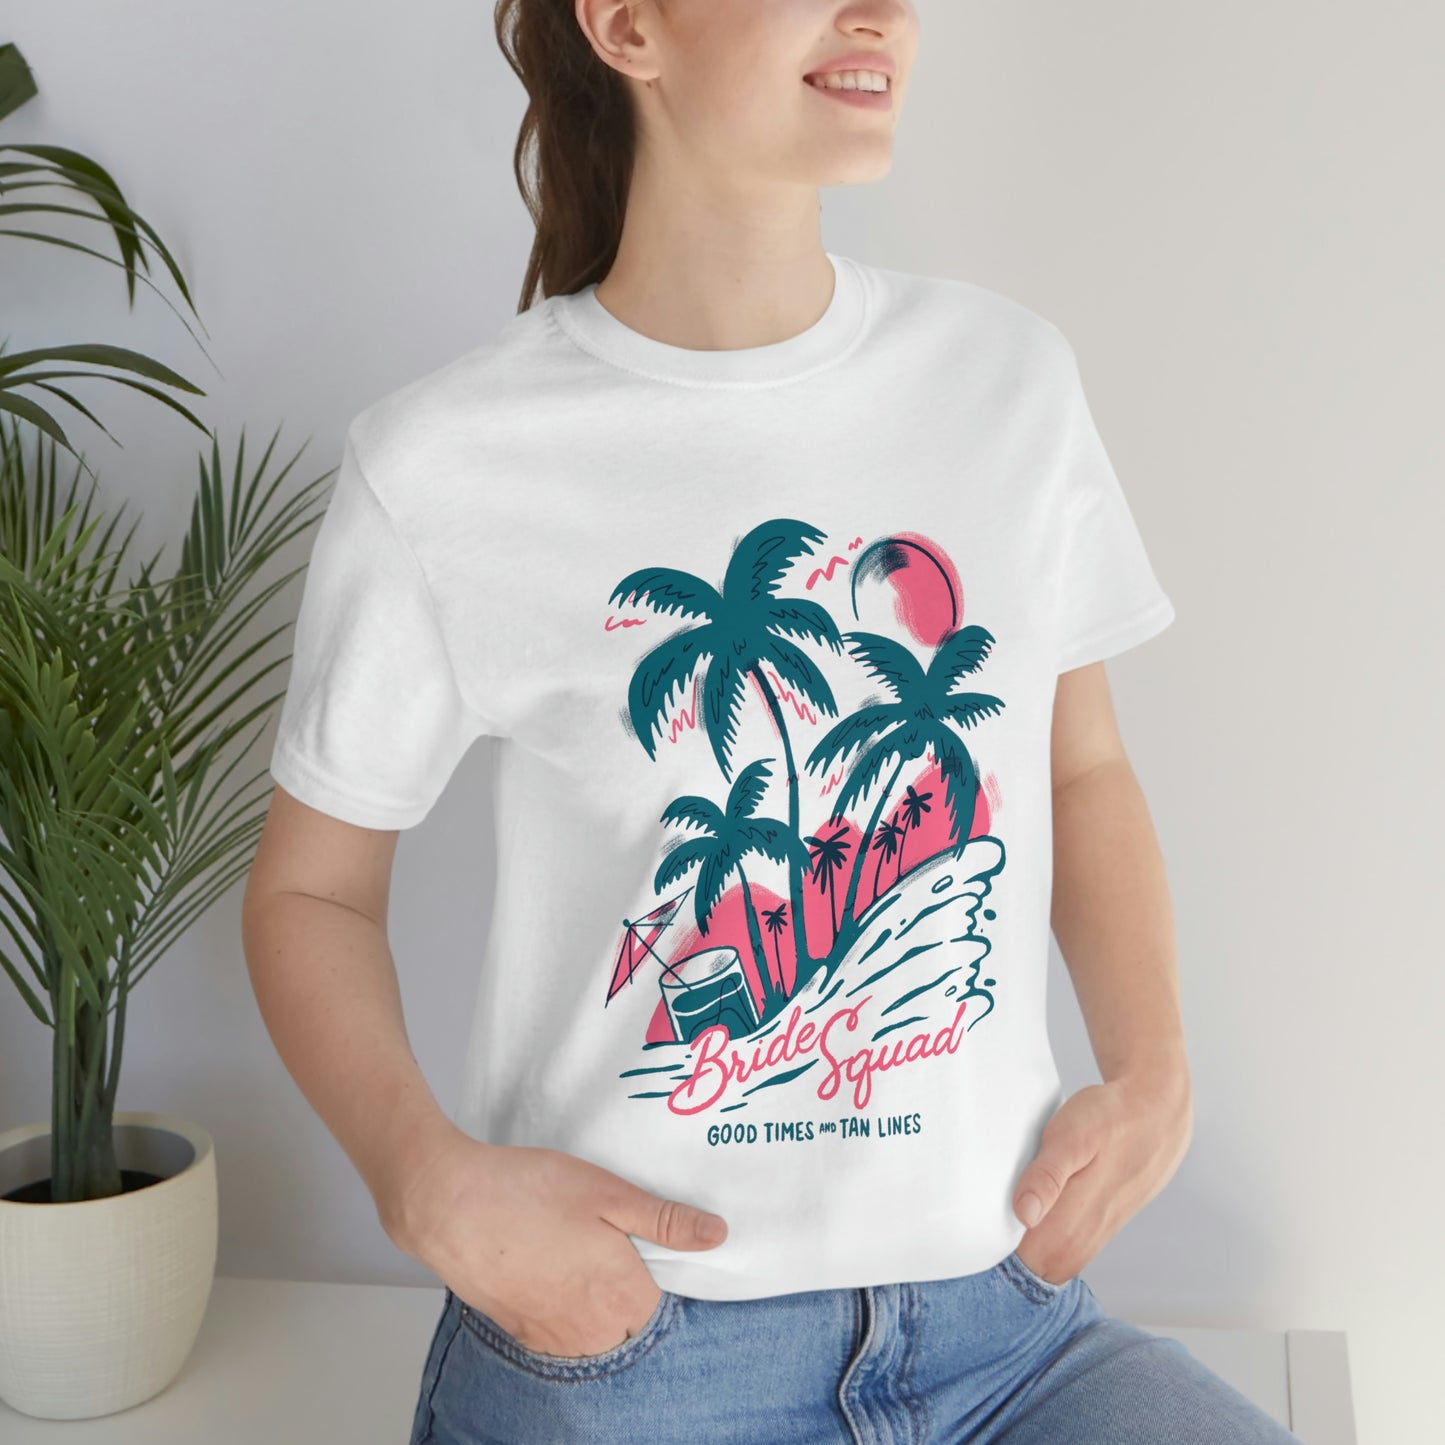 Bride Squad - Good times and tan lines retro t-shirt - Print on front